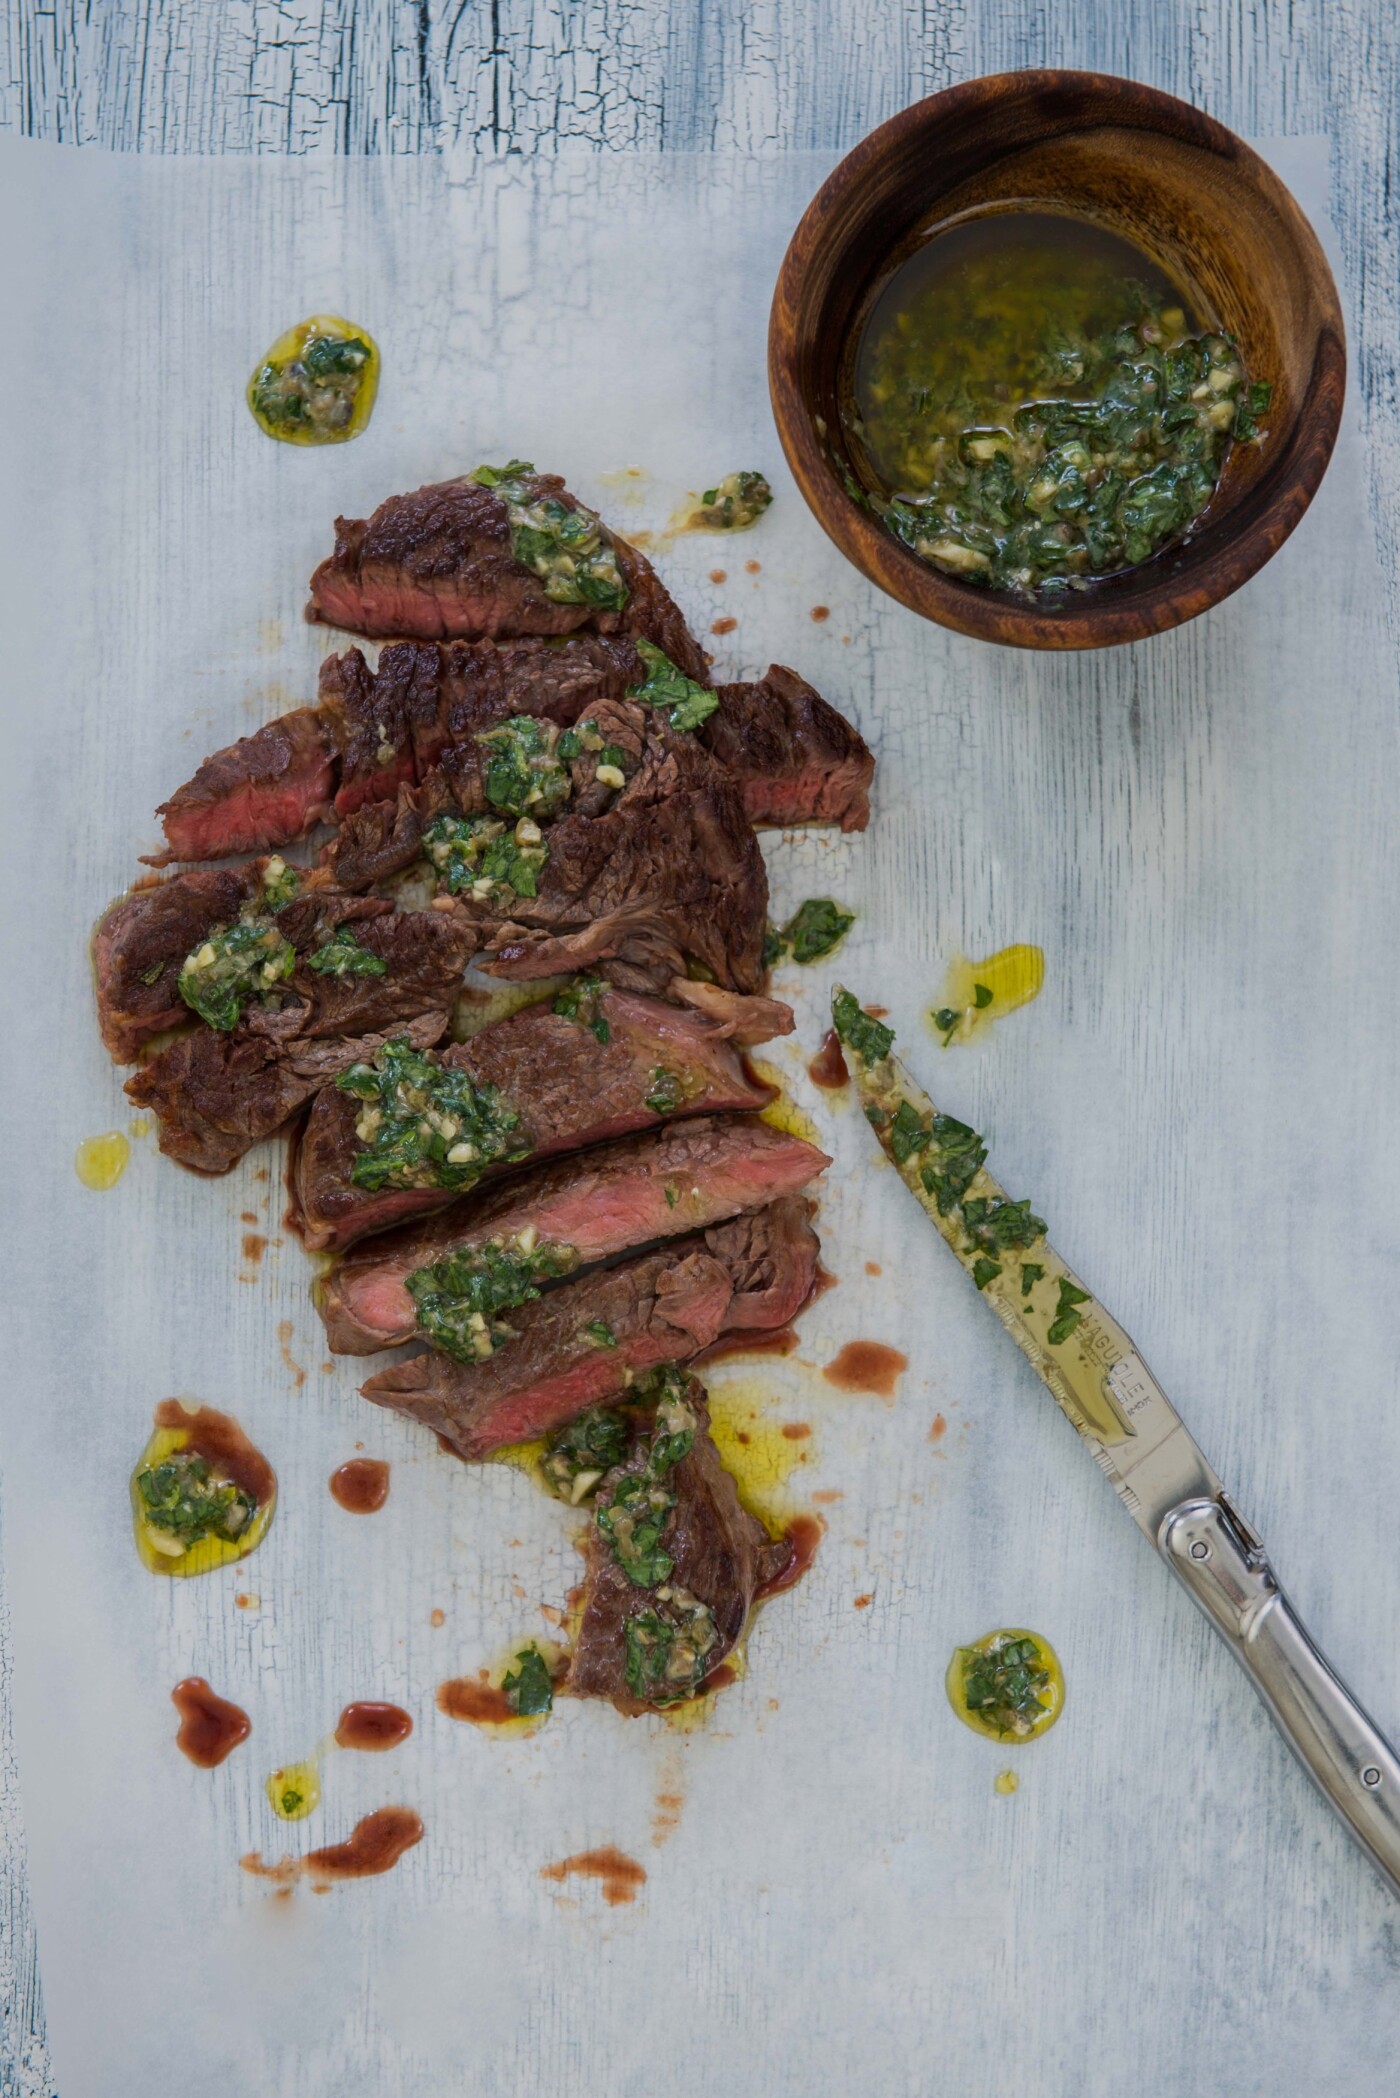 Back home, my favorite restaurant that makes a great steak served with chimichurri on the side. I was missing home the day I shot this, and craving that delicious and perfectly cooked dish and so I tried to replicate it in my kitchen. I shot it the way I like to eat it; slathered in chimichurri and bursting with flavor!